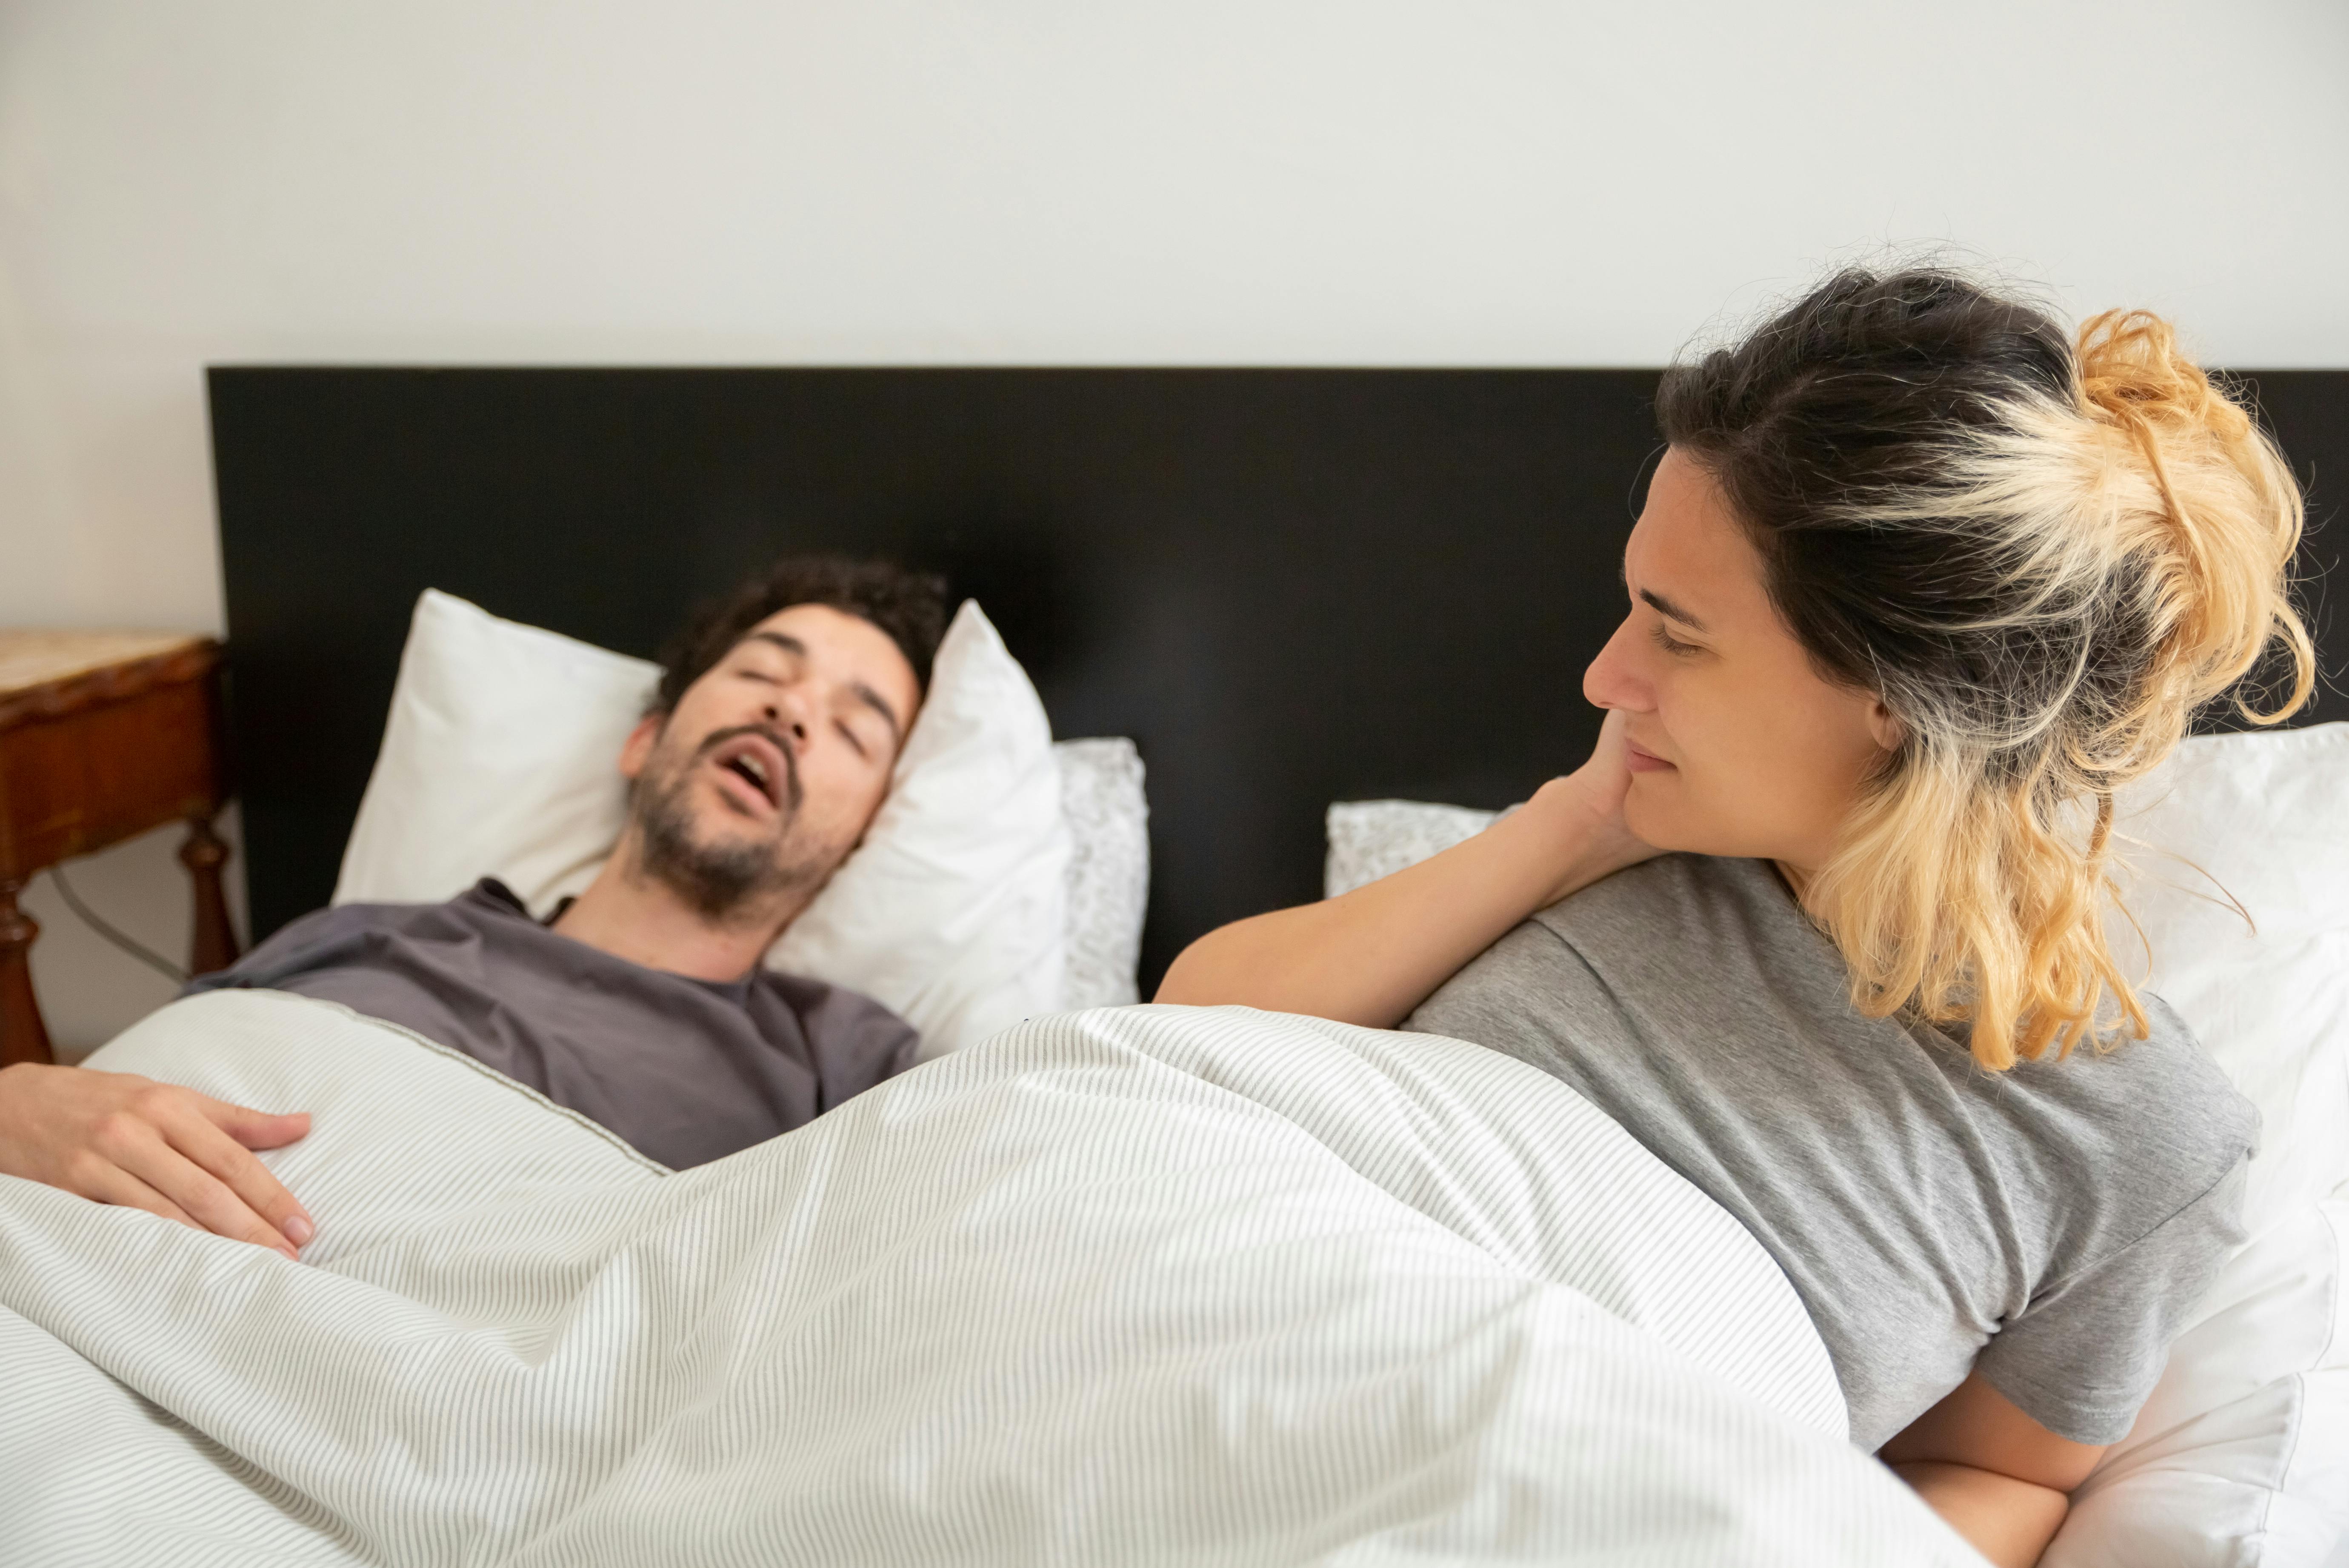 An unhappy woman looking at her man while he sleeps | Source: Pexels